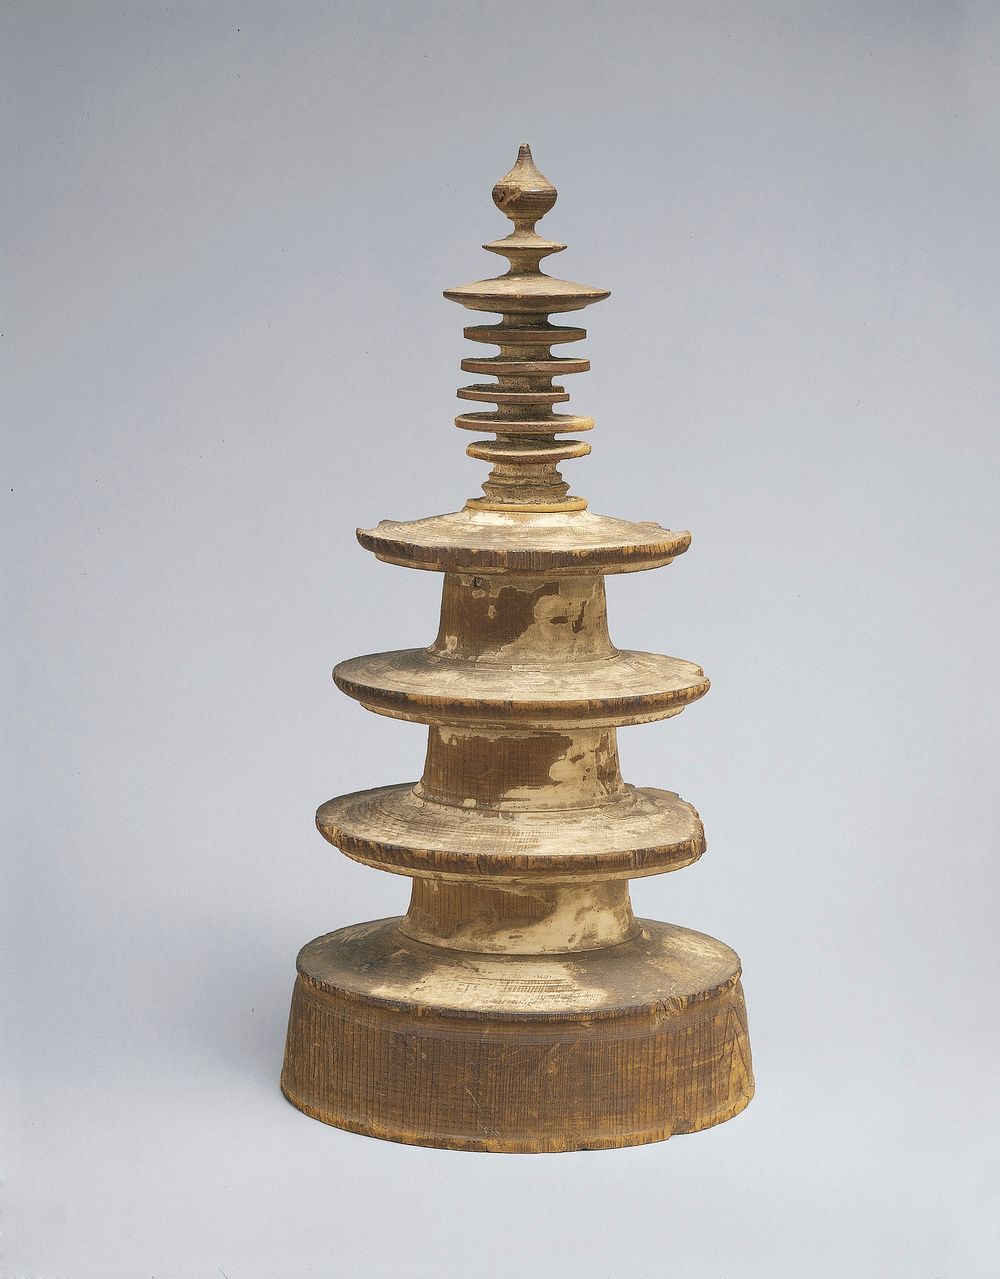 two-piece round pagoda with four disk-like sections; spindly finial sits on top; white pigment fragments. Original from the…